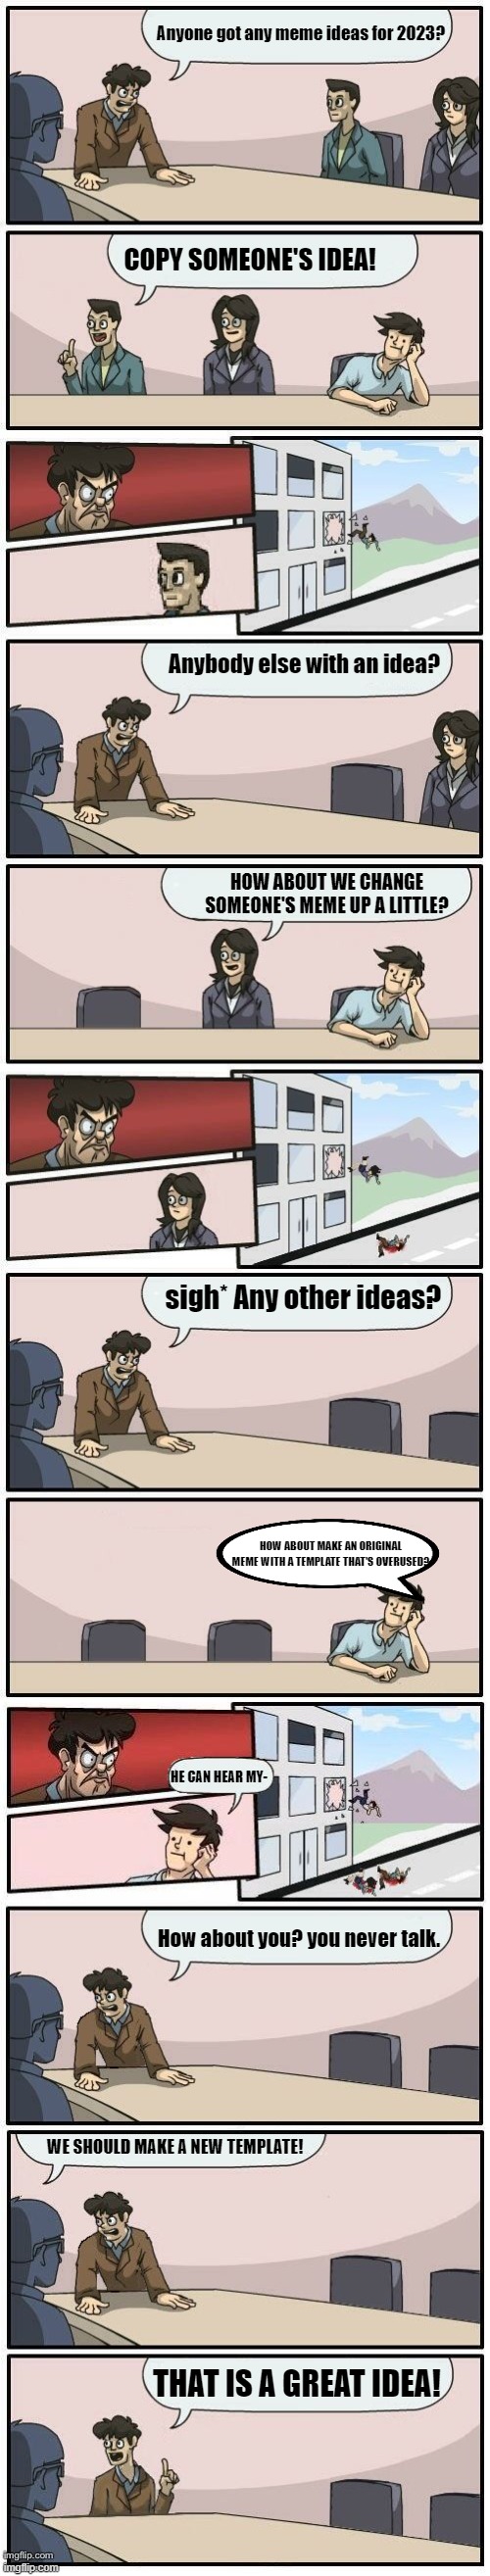 Boardroom Meeting Suggestions Extended |  Anyone got any meme ideas for 2023? COPY SOMEONE'S IDEA! Anybody else with an idea? HOW ABOUT WE CHANGE SOMEONE'S MEME UP A LITTLE? sigh* Any other ideas? HOW ABOUT MAKE AN ORIGINAL MEME WITH A TEMPLATE THAT'S OVERUSED? HE CAN HEAR MY-; How about you? you never talk. WE SHOULD MAKE A NEW TEMPLATE! THAT IS A GREAT IDEA! | image tagged in boardroom meeting suggestions extended | made w/ Imgflip meme maker